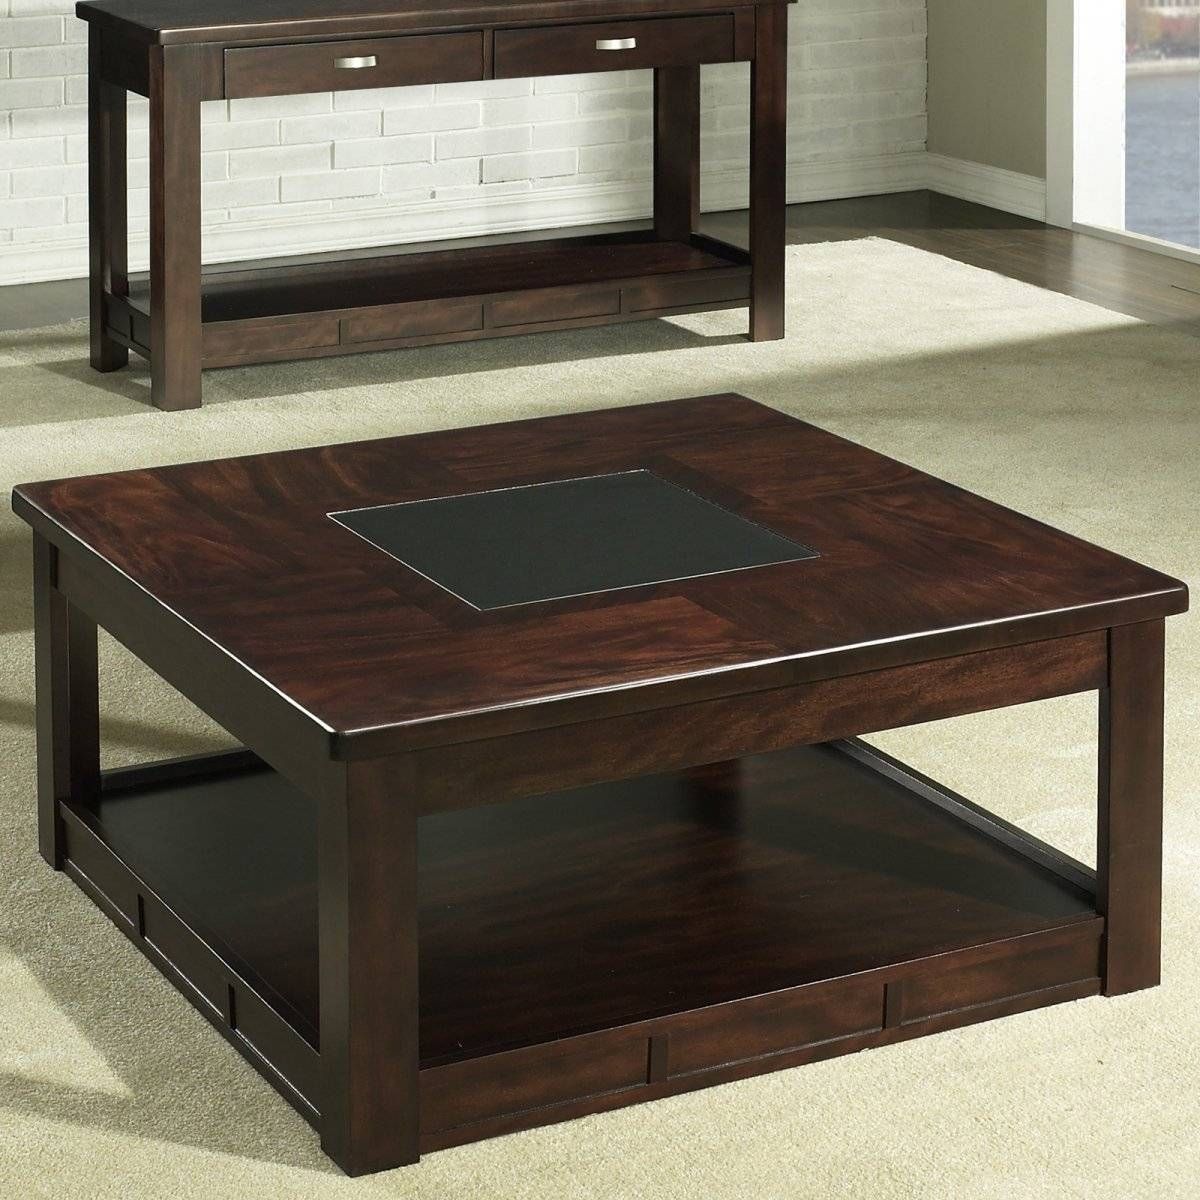 Square Wood Coffee Table With Drawers And Glass Top – Jericho For Square Coffee Tables With Drawers (View 3 of 30)